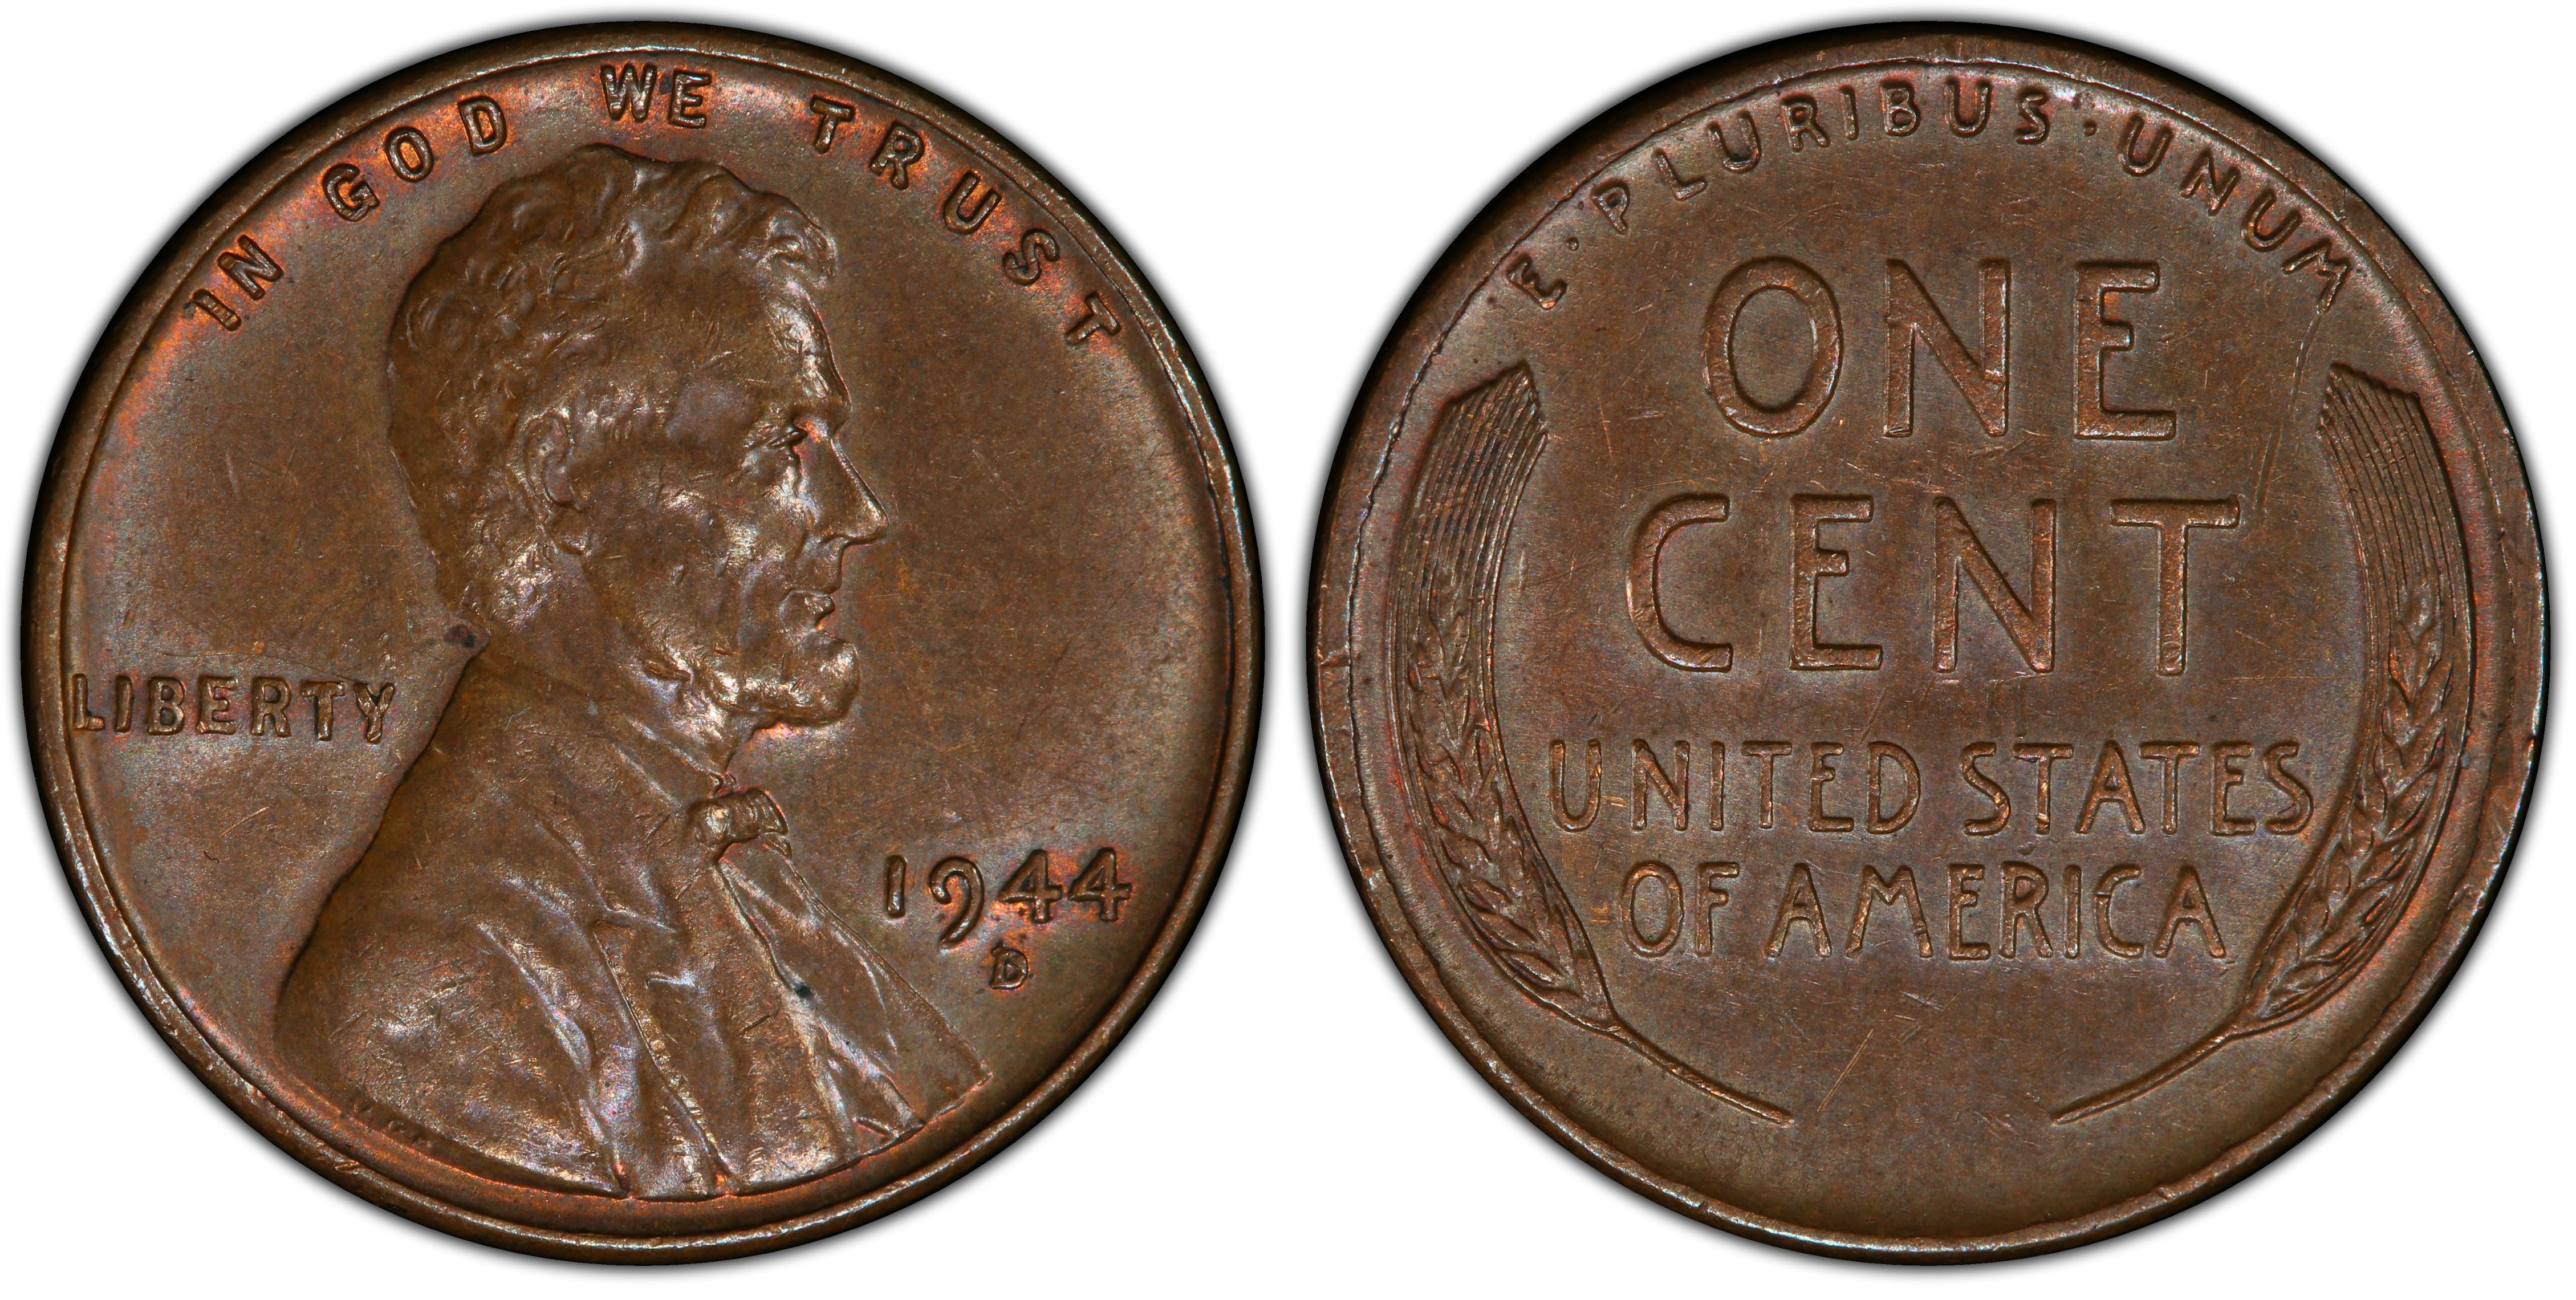 1944 D S 1c Bn Regular Strike Lincoln Cent Wheat Reverse Pcgs Coinfacts,How Much Is A Silver Quarter Worth